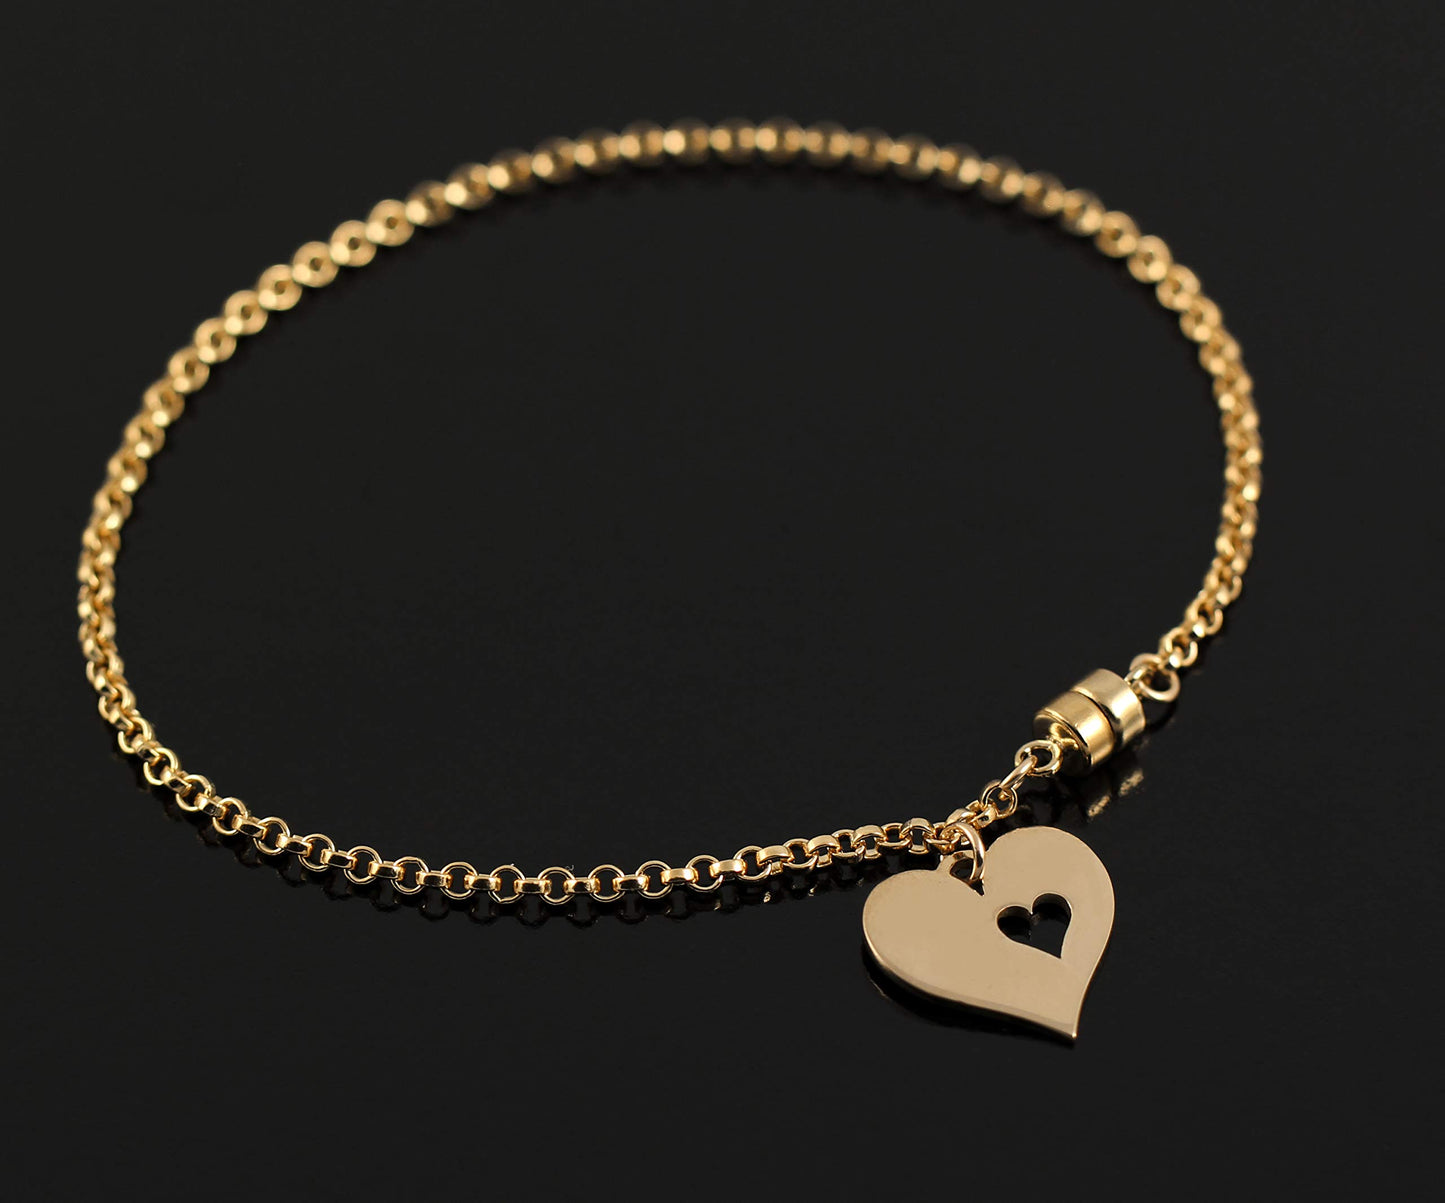 Gold Grandmother Granddaughter Bracelet with Card • Two Connected Hearts Bracelet • Gifts for Women • Grandmother Jewelry • 14k Gold Filled Bracelet • MAGNETIC CLASP • Gifts for Grandma Granddaughter